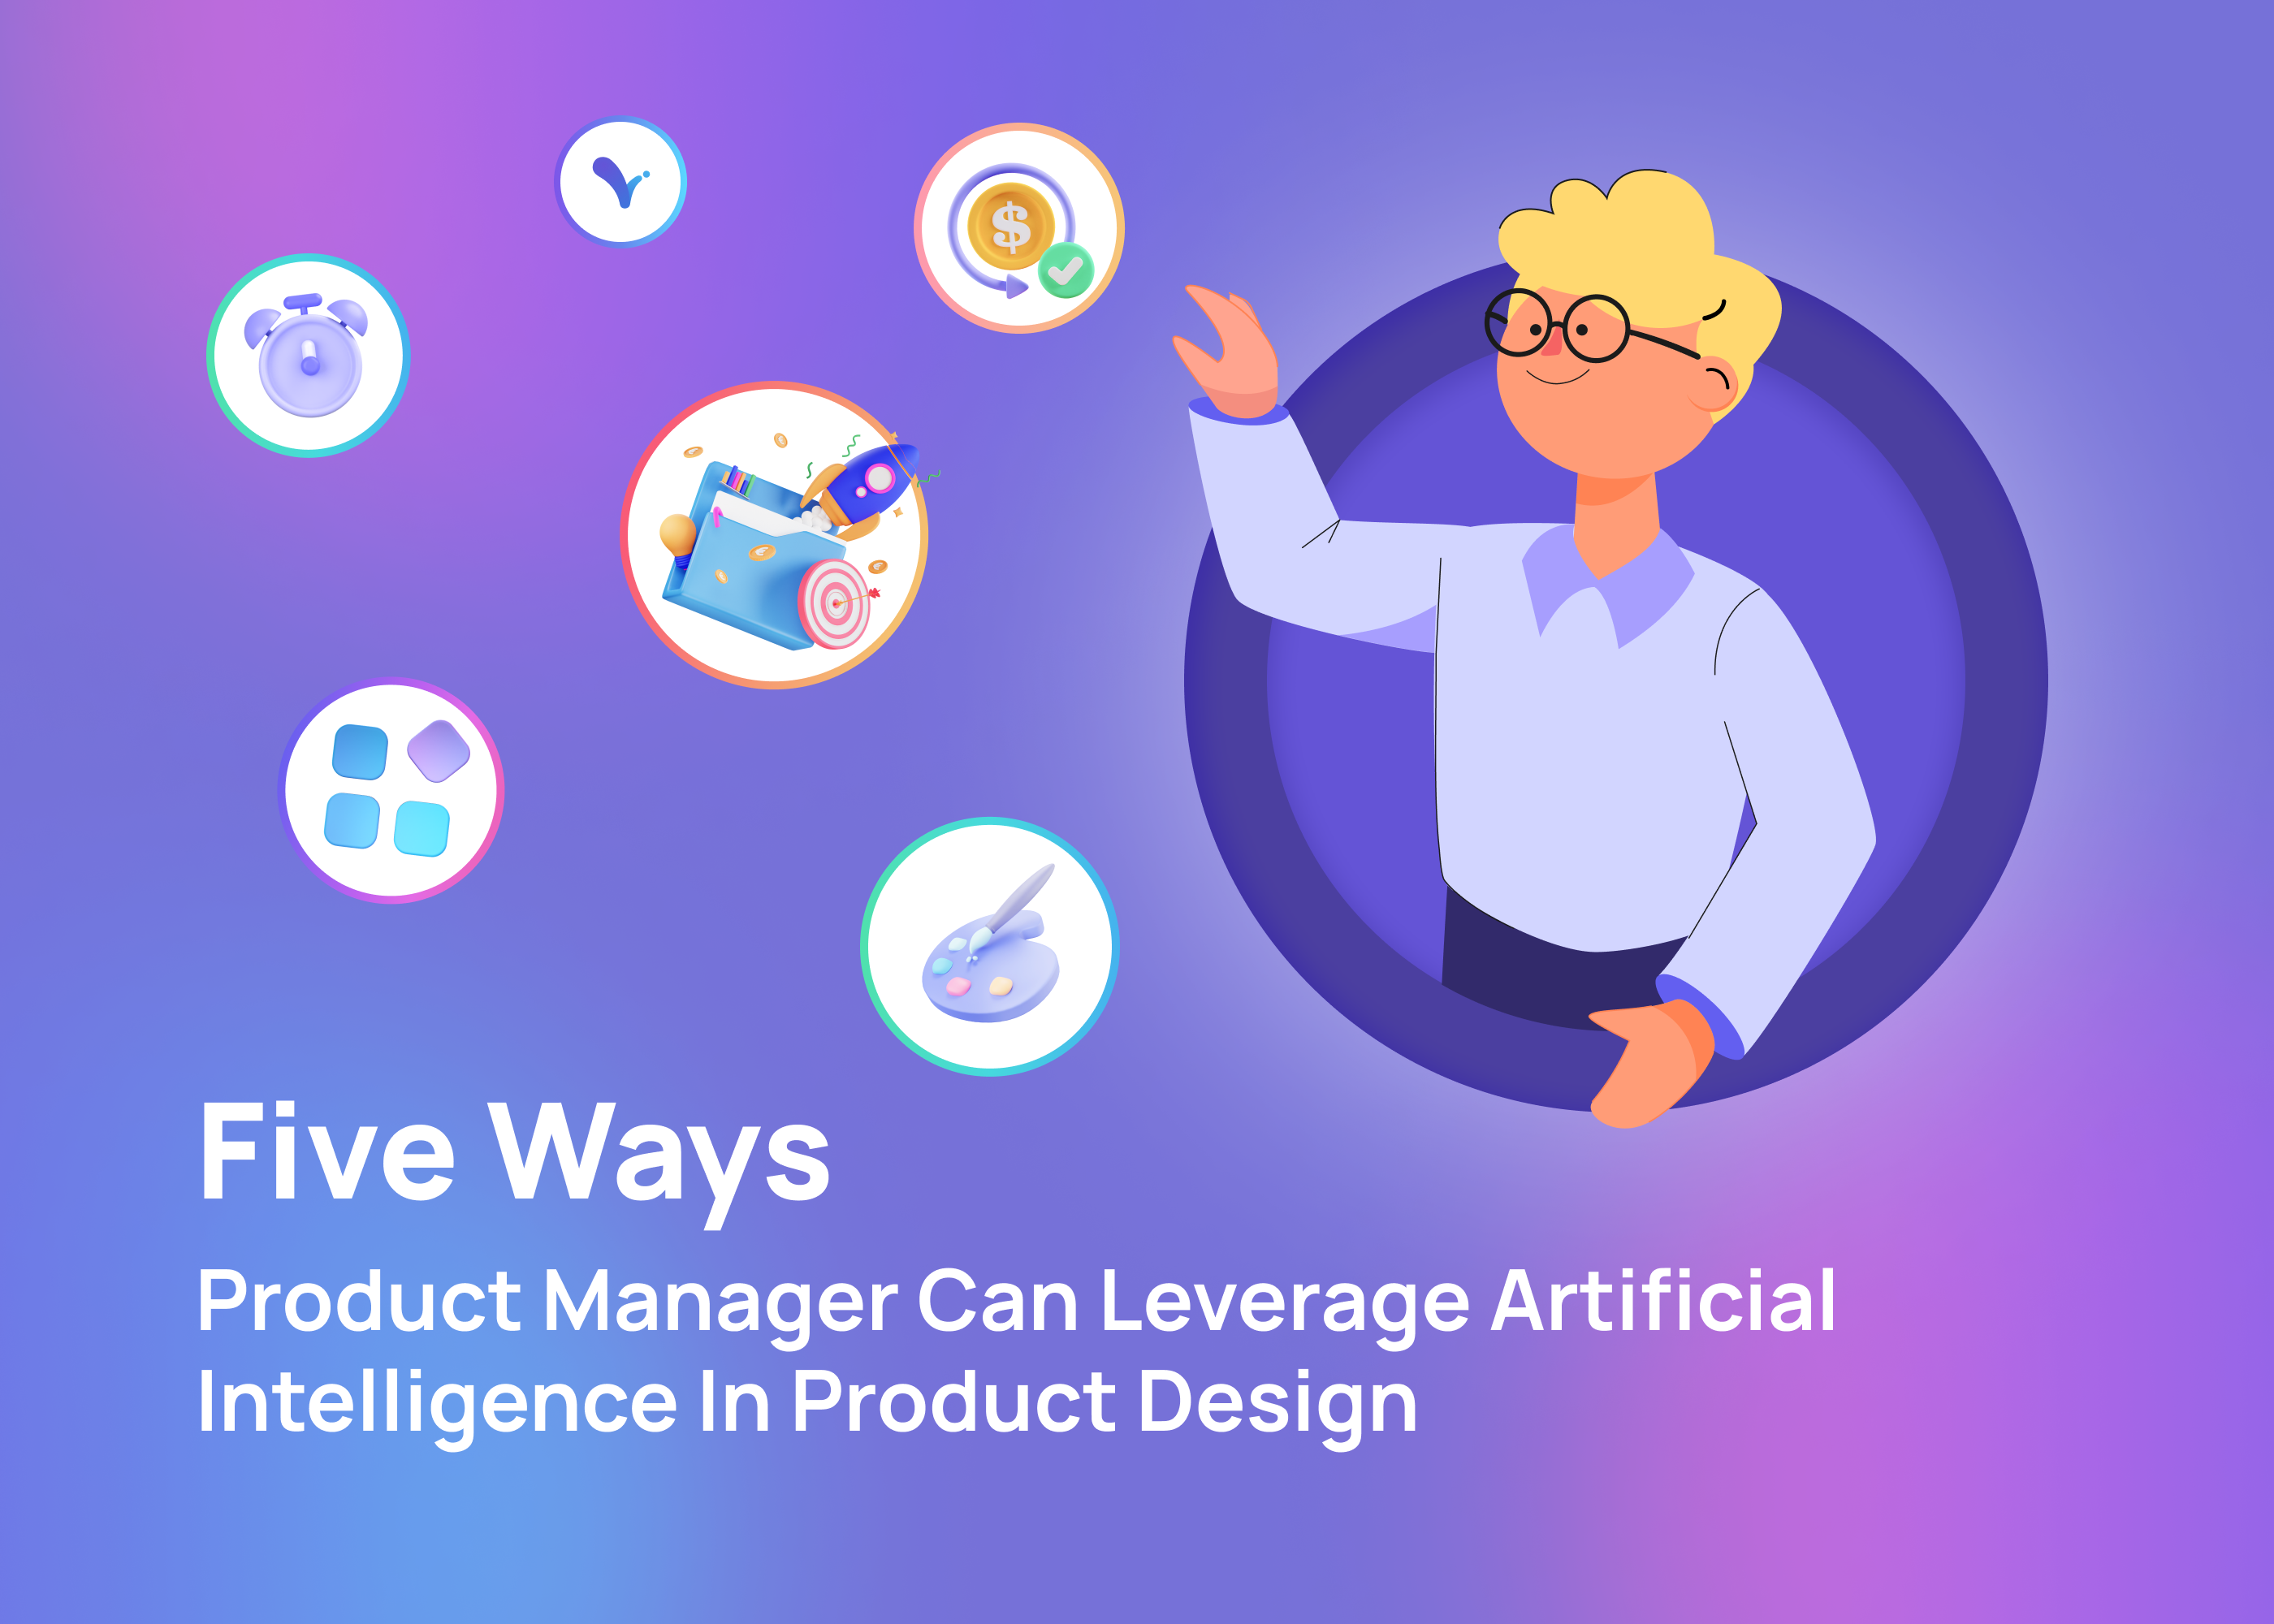 6 Ways Product Managers Can Leverage Artificial Intelligence in Product Design